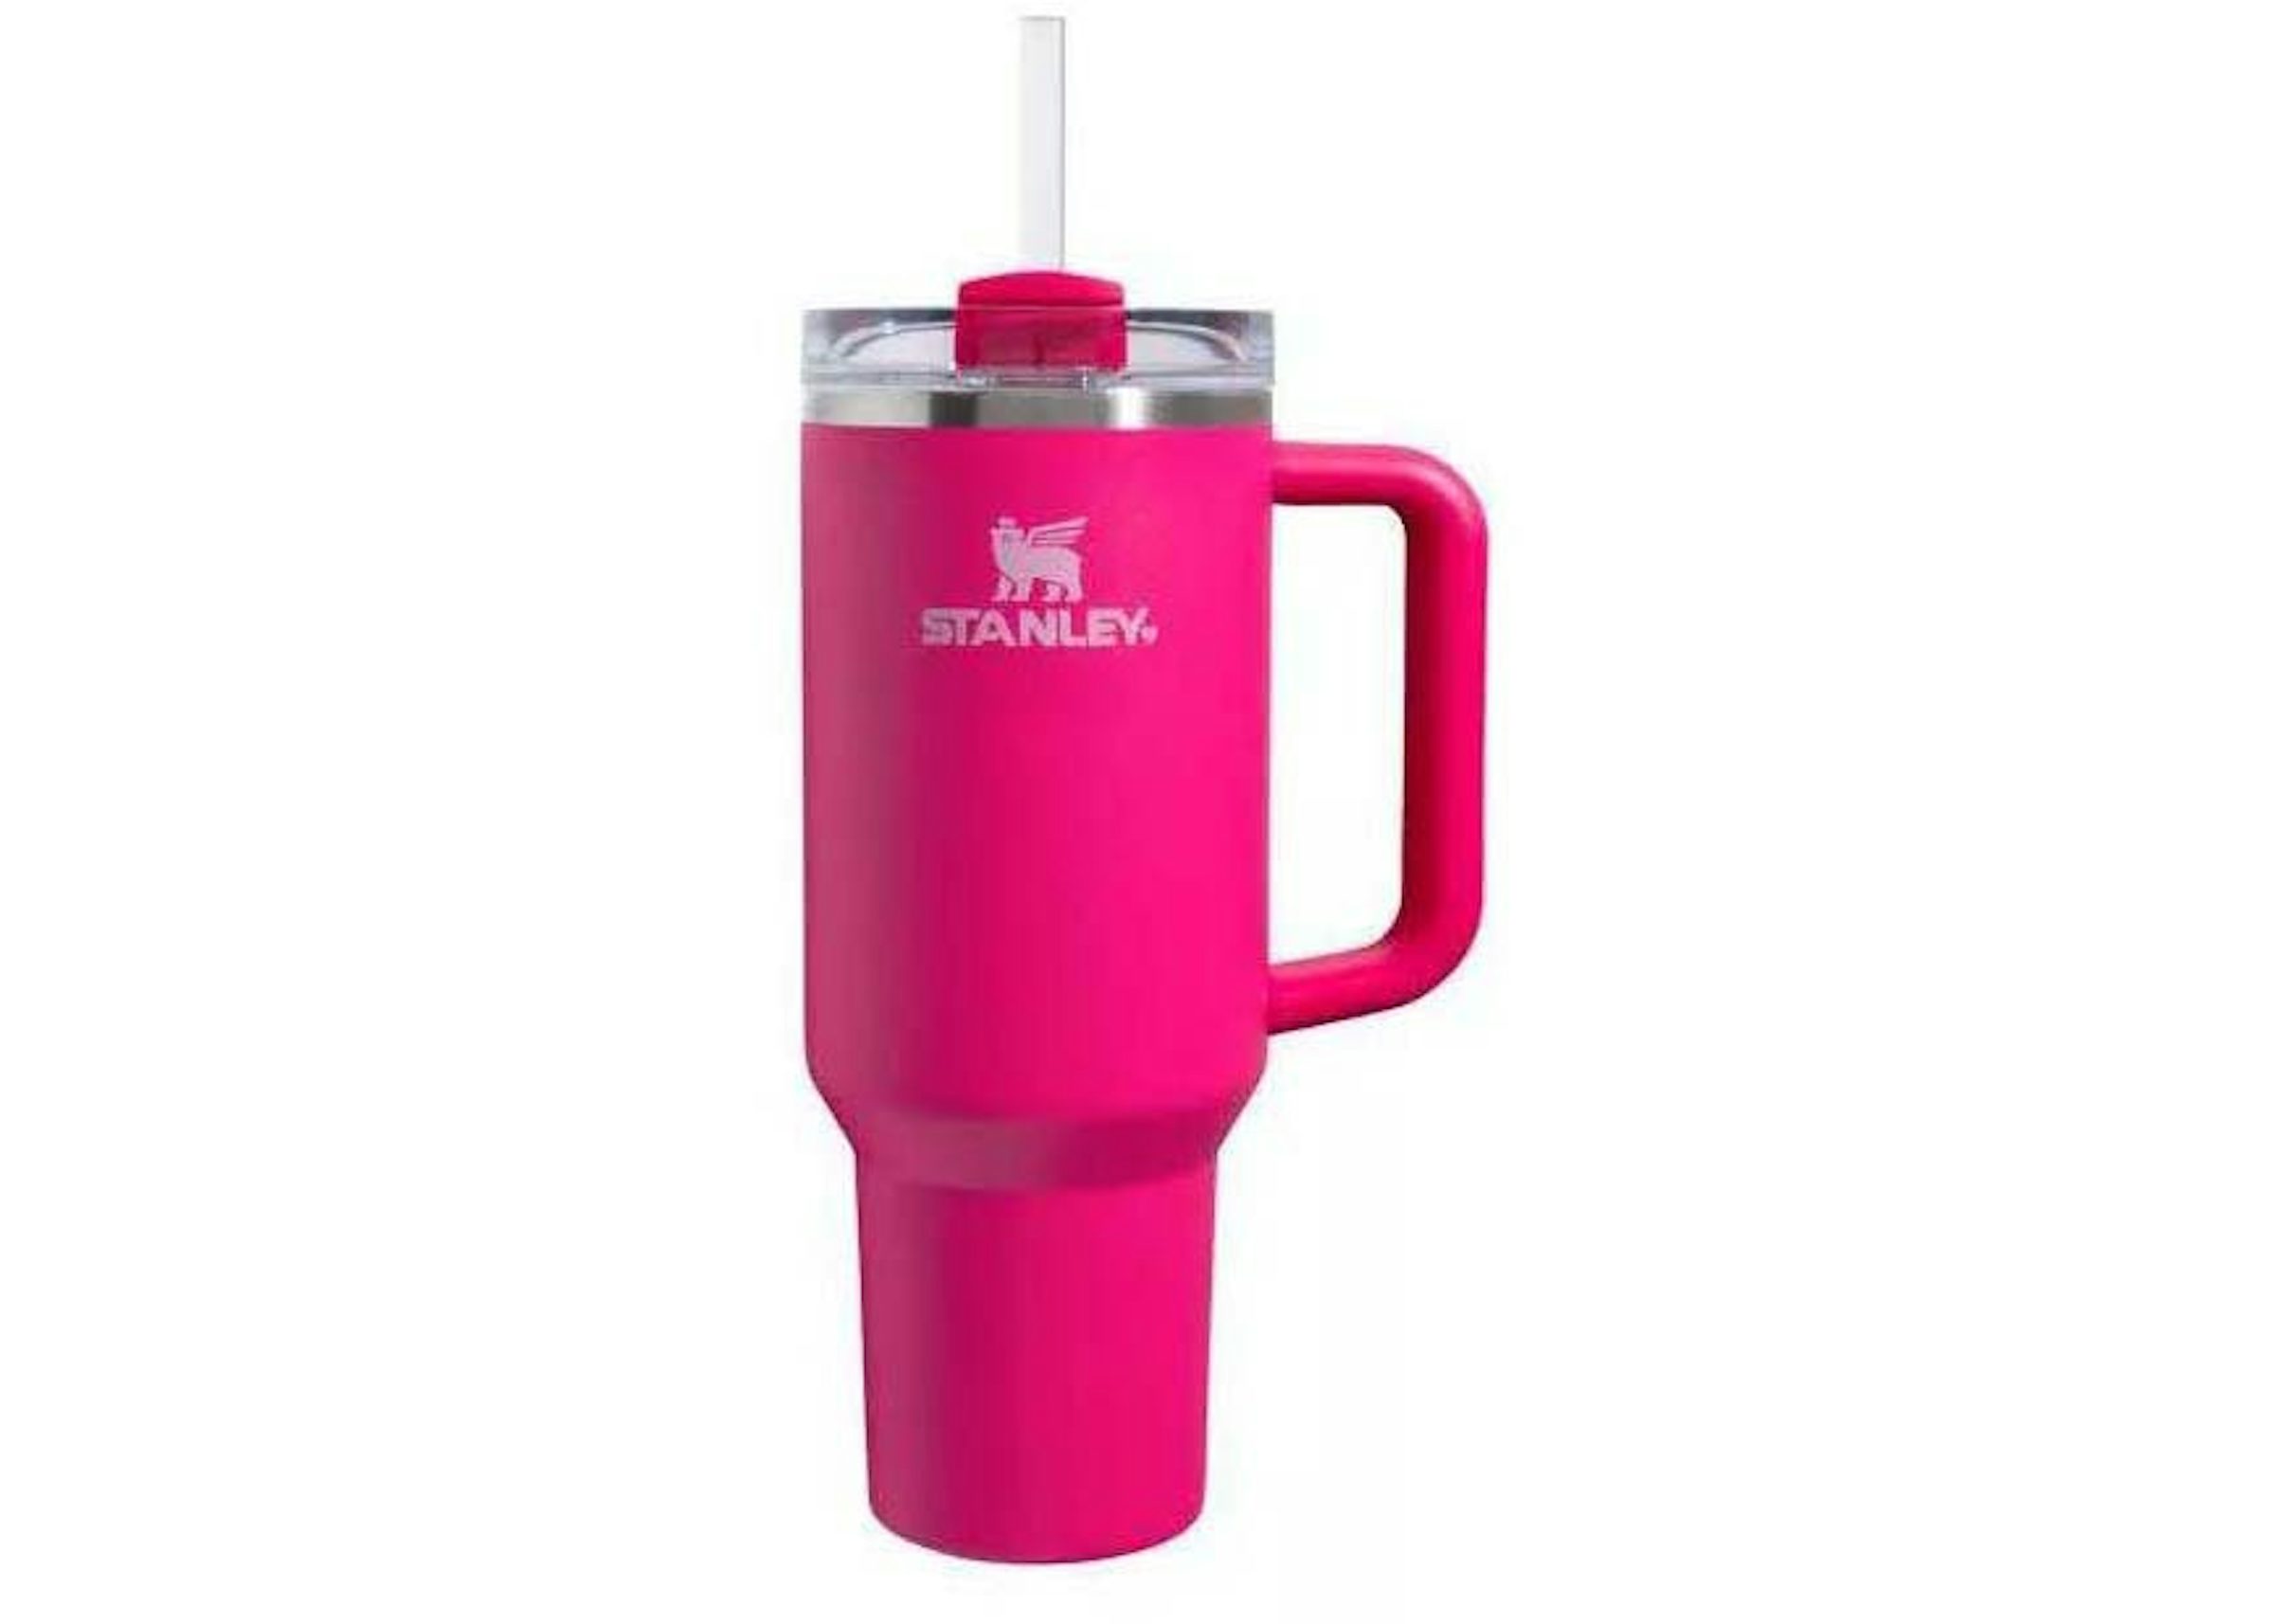 https://images.stockx.com/images/Stanley-Flowstate-Quencher-40oz-Target-Exclusive-Tumbler-Cosmo-Pink.jpg?fit=fill&bg=FFFFFF&w=1200&h=857&fm=jpg&auto=compress&dpr=2&trim=color&trimcolor=ffffff&updated_at=1704219012&q=60